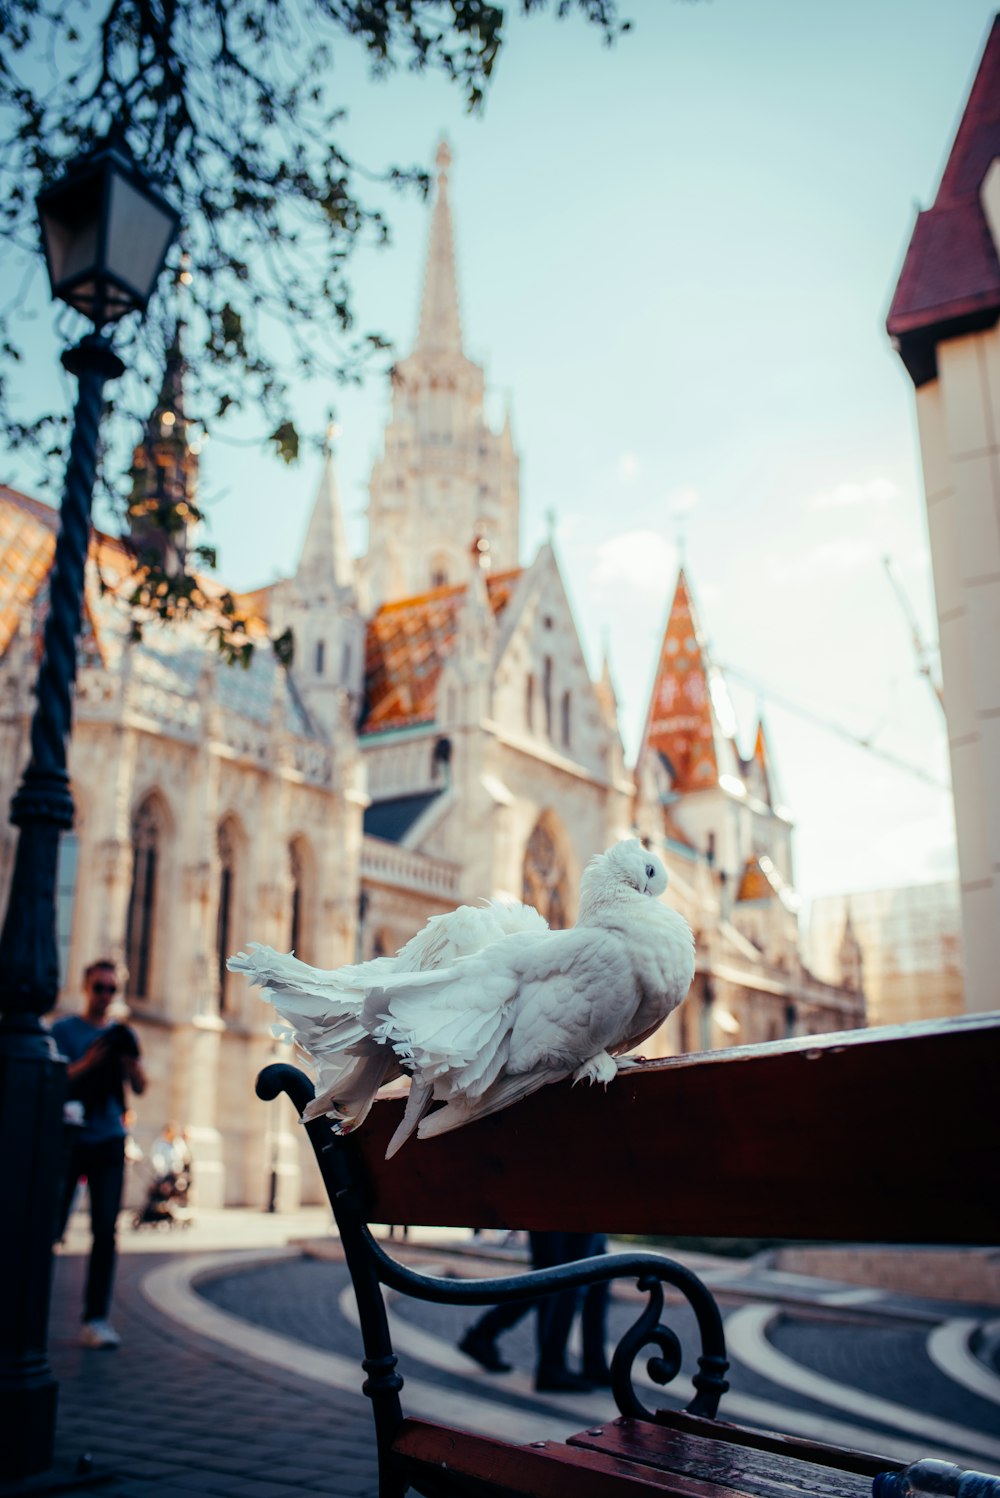 a white bird sitting on top of a wooden bench